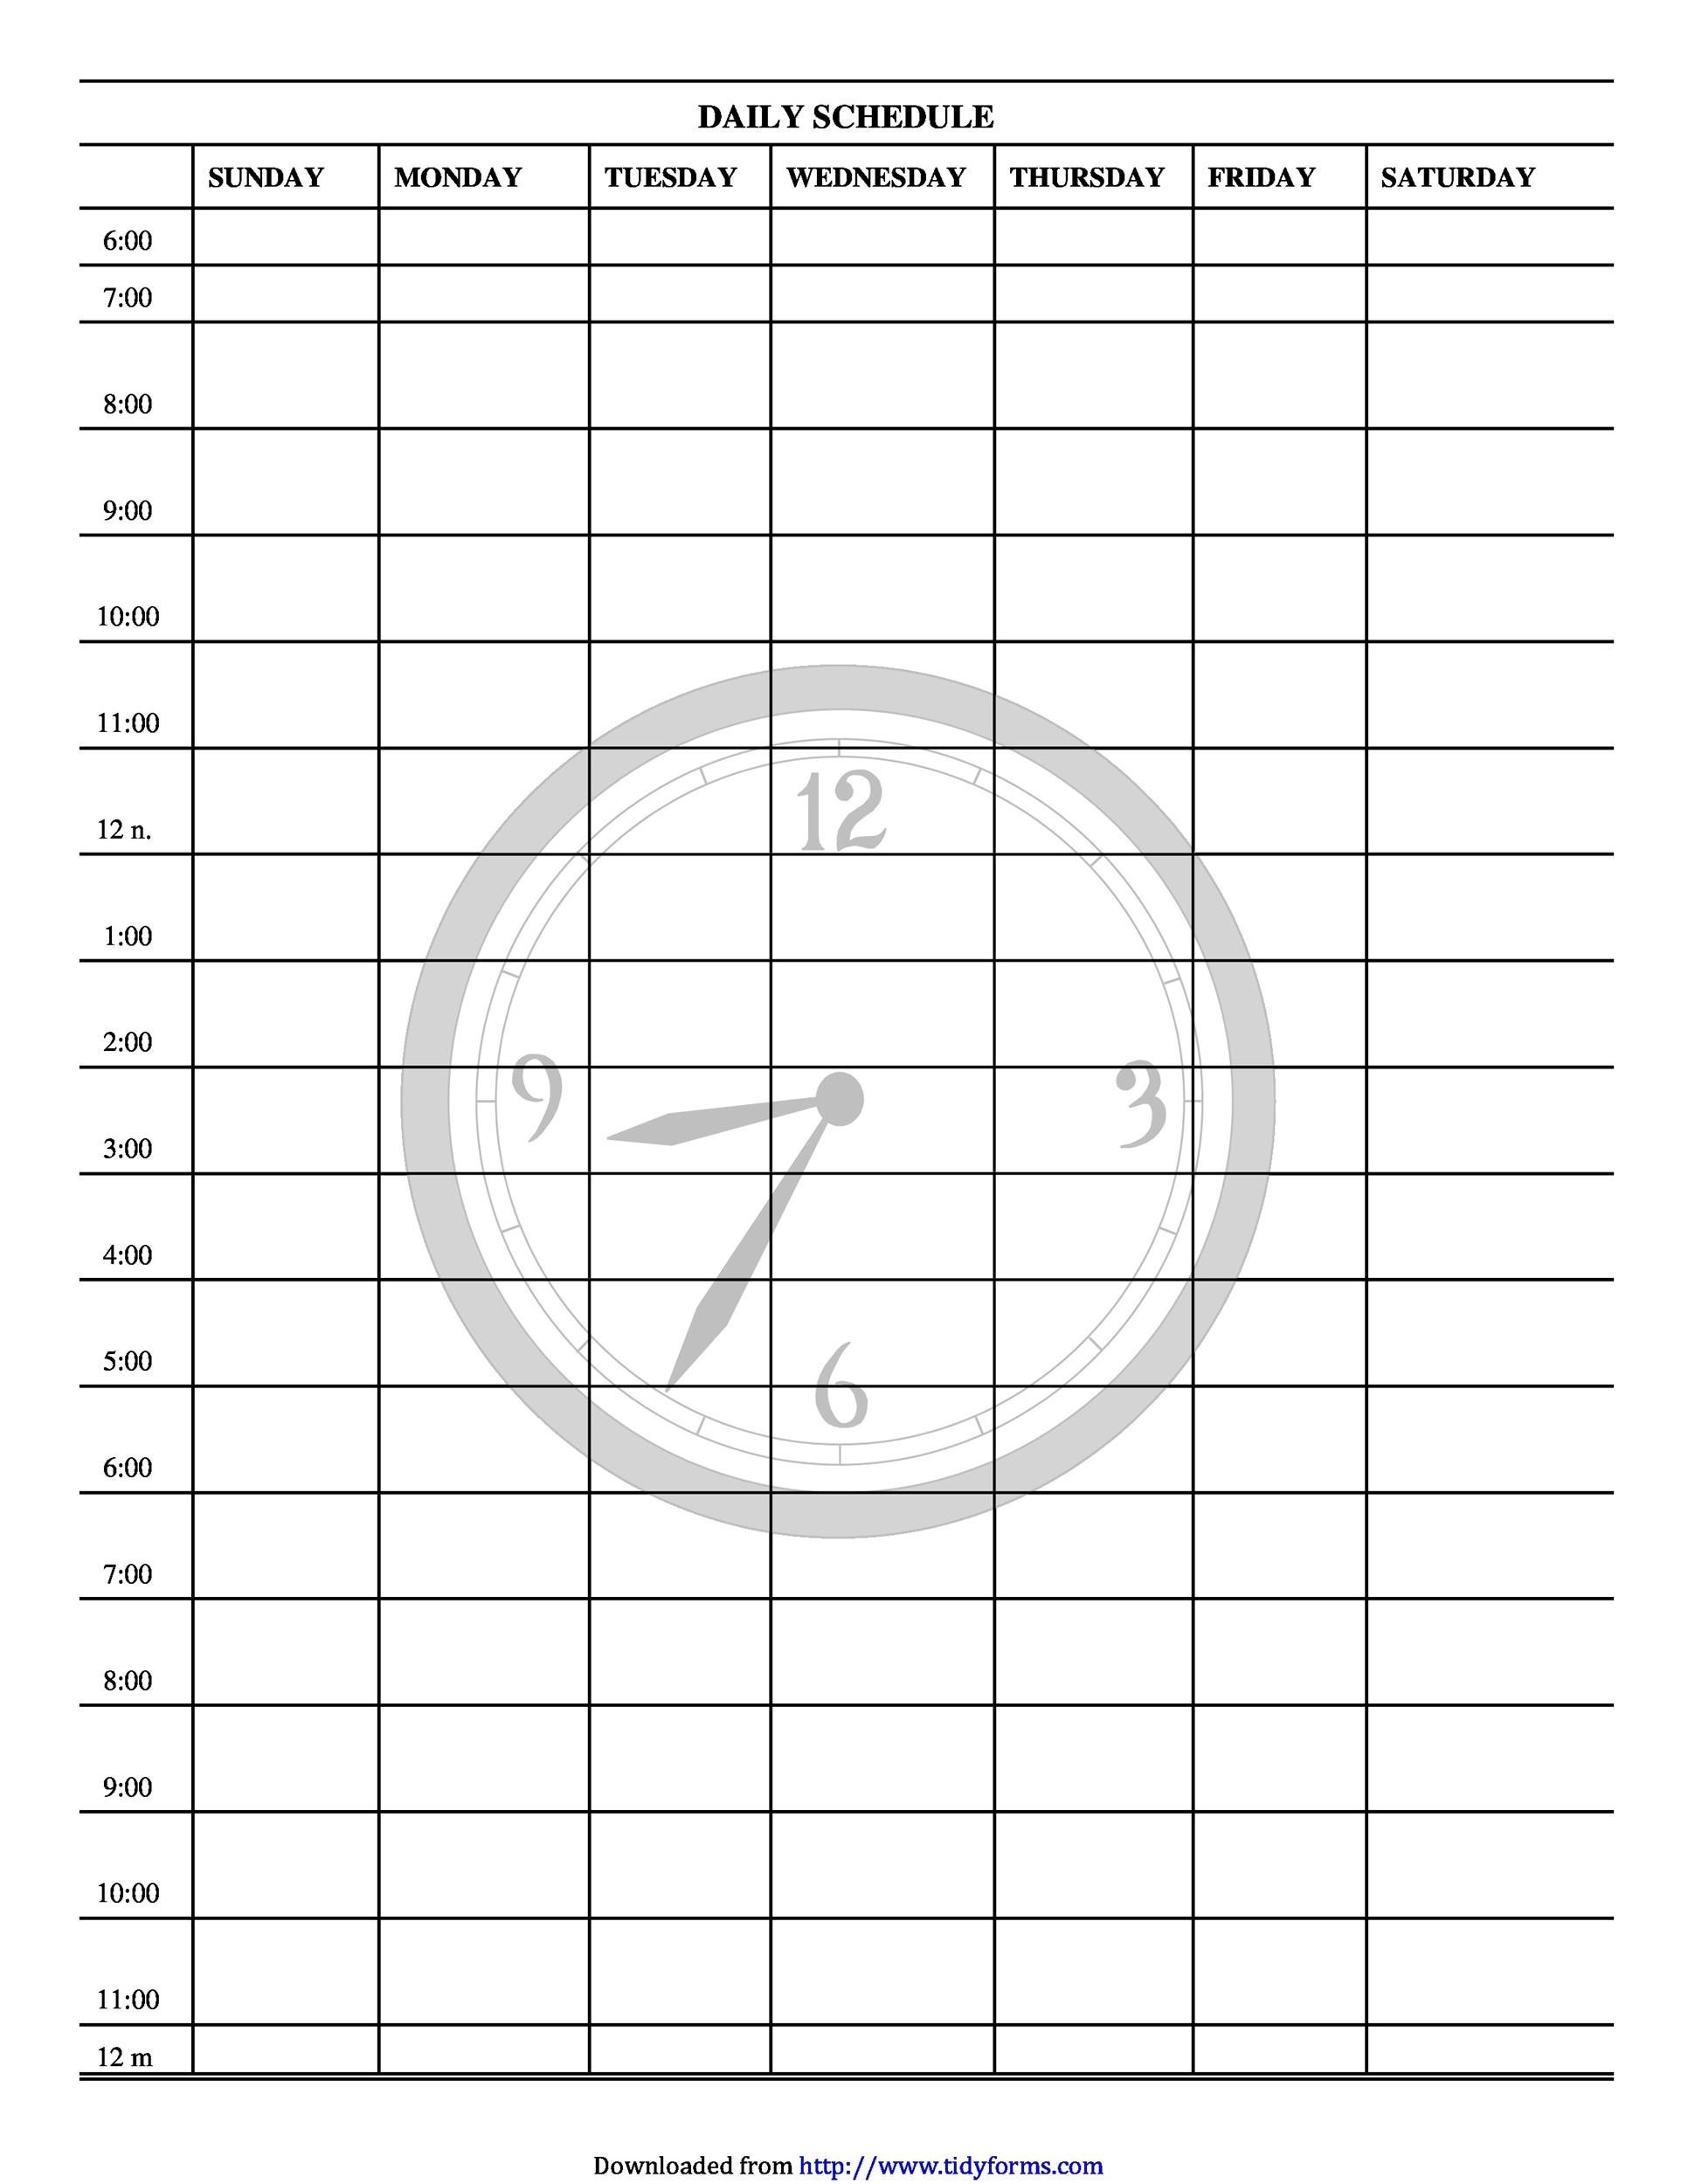 Blank Daily Schedule Chart